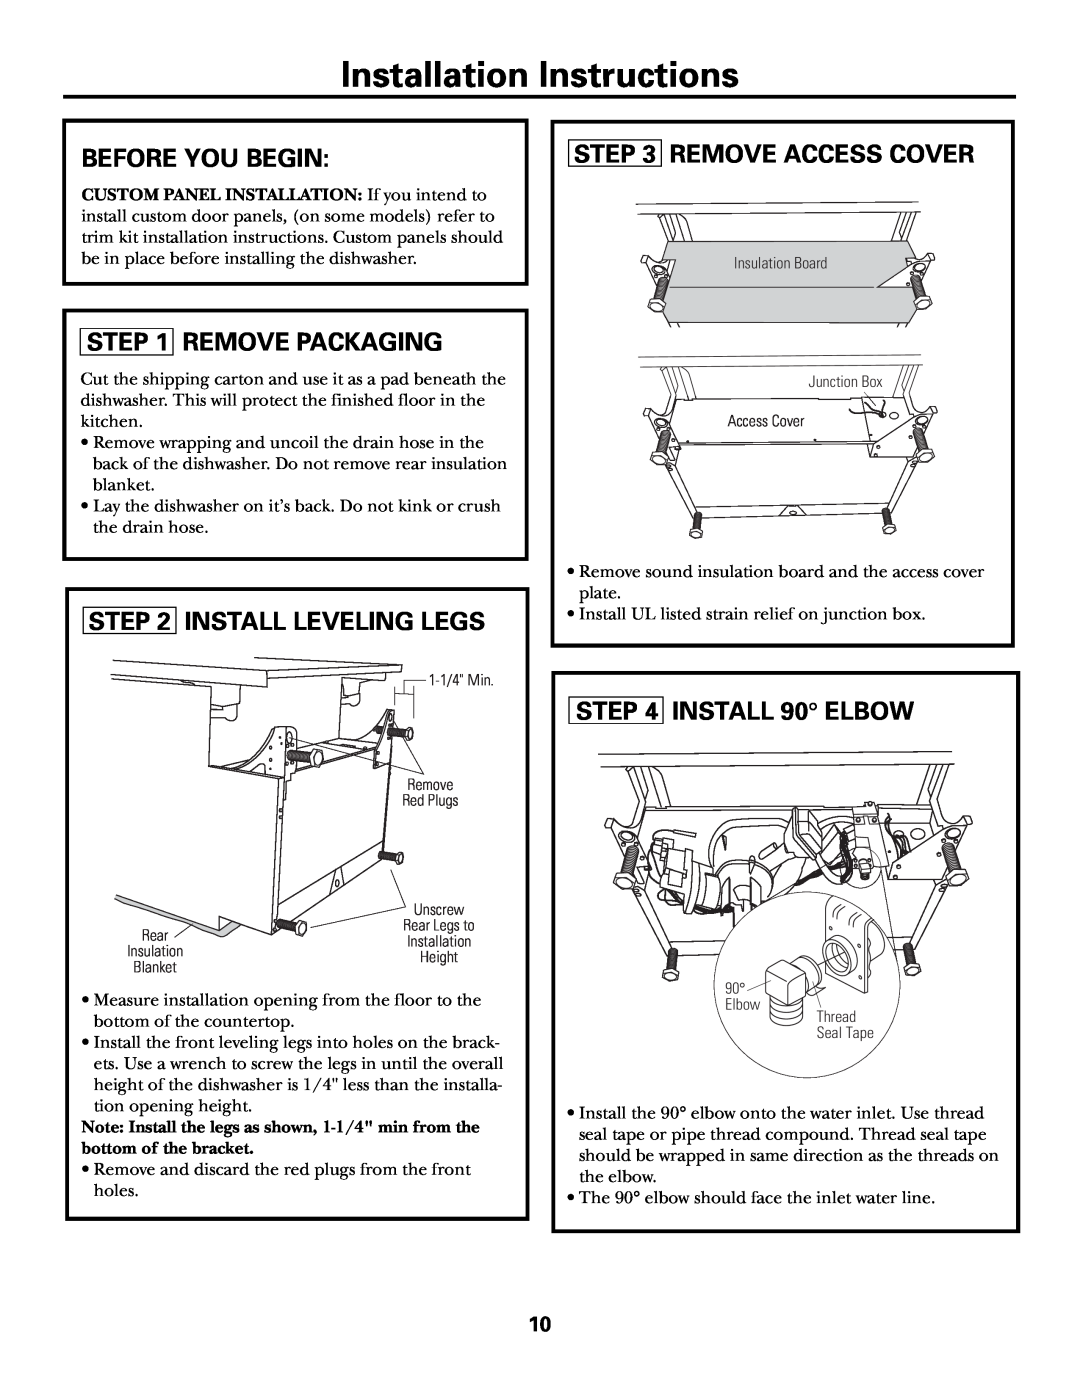 GE Monogram ZBD6600 Installation Instructions, Before You Begin, Remove Packaging, Install Leveling Legs, INSTALL 90 ELBOW 